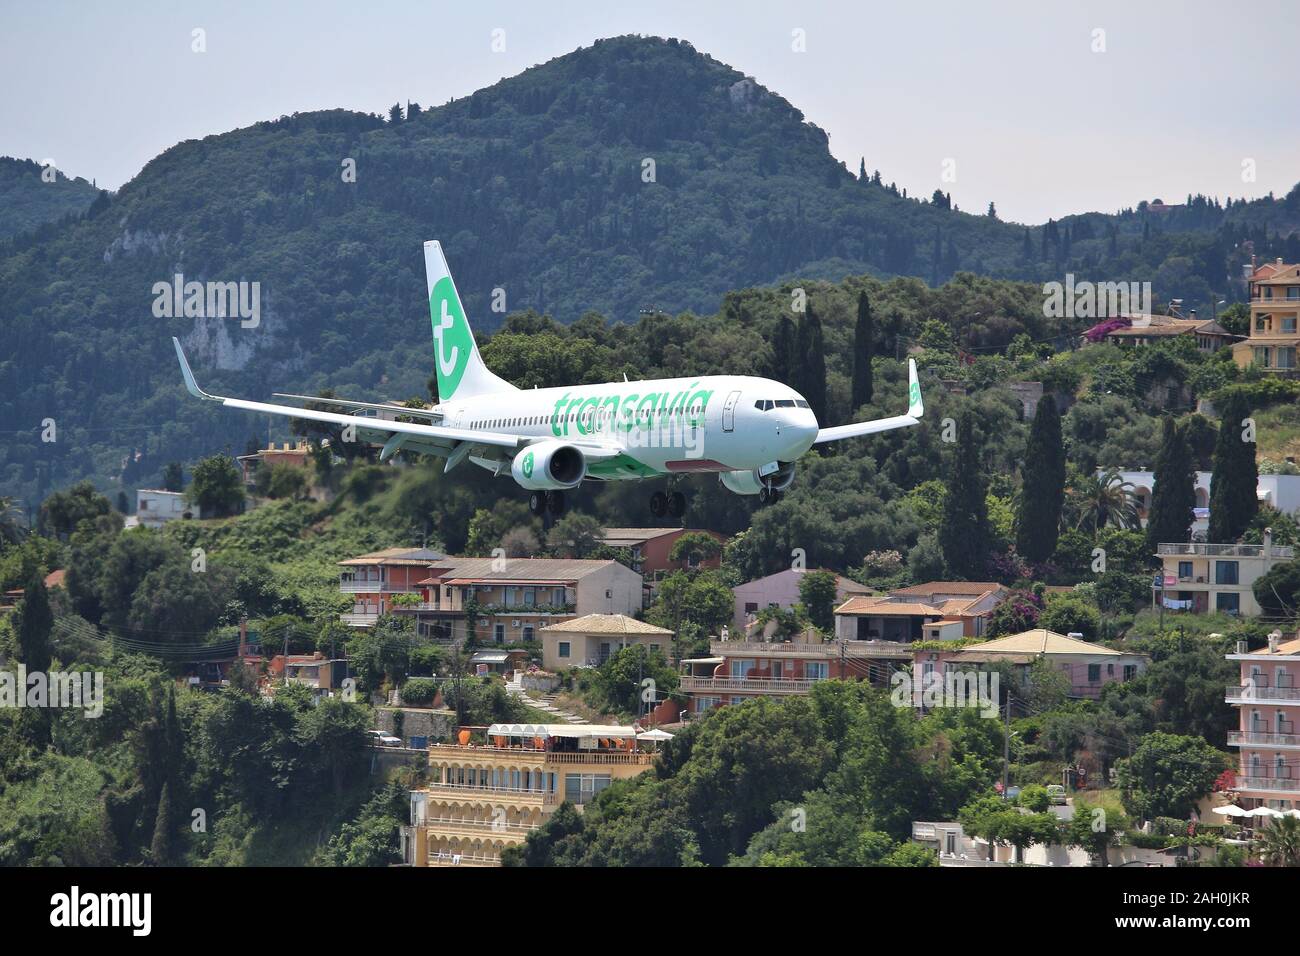 CORFU, GREECE - JUNE 5, 2016: Transavia Boeing 737-800 arrives at Corfu International Airport, Greece. Transavia is a Dutch low-cost airline owned by Stock Photo